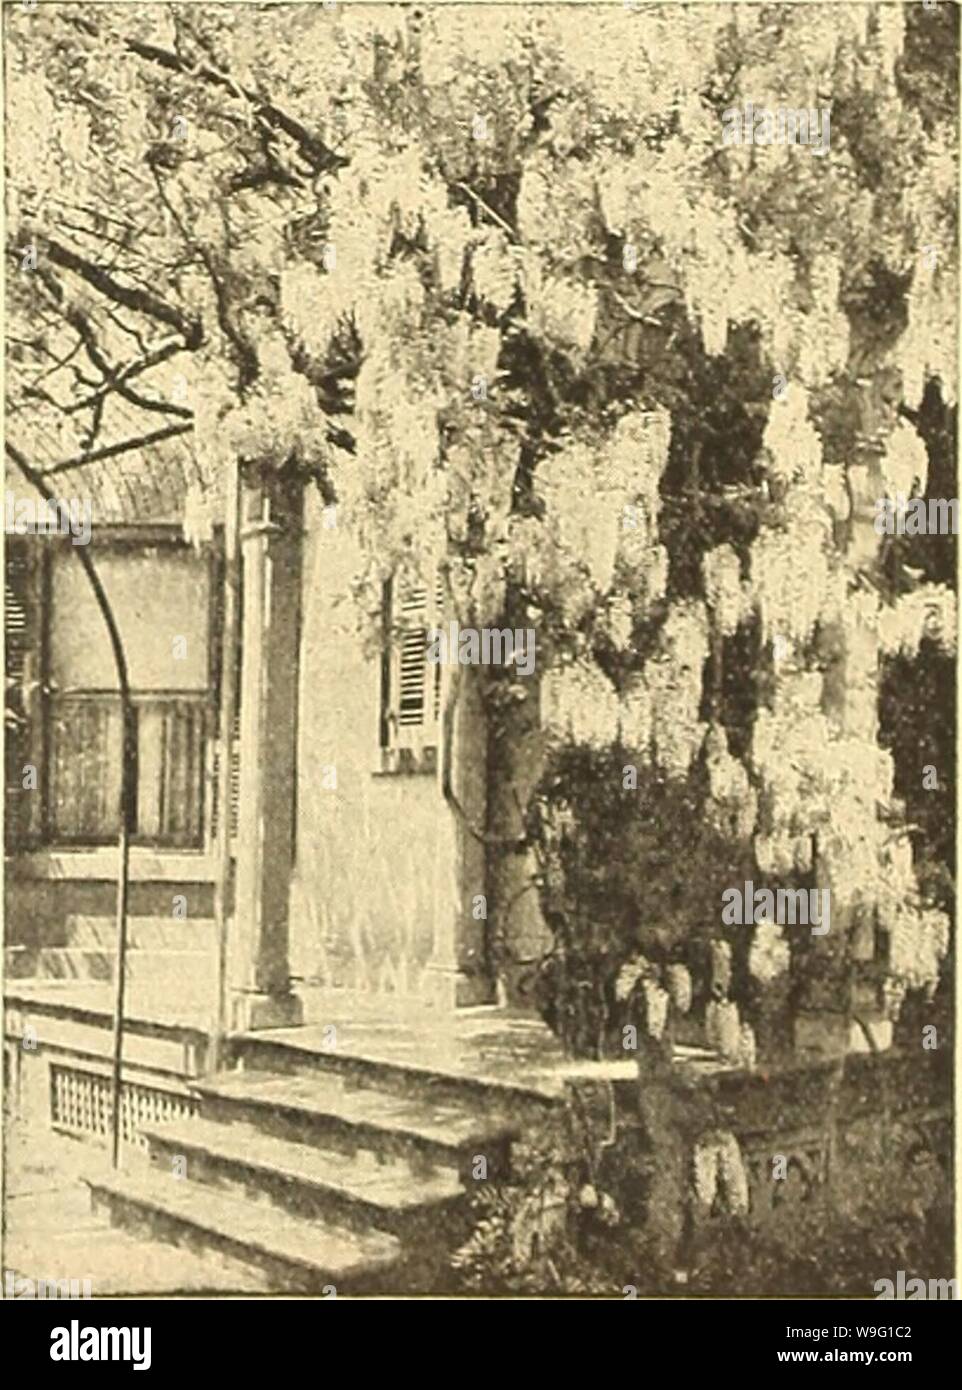 Archive image from page 91 of Currie's farm and garden annual. Currie's farm and garden annual : spring 1920 45th year  curriesfarmgarde19curr 3 Year: 1920 ( ? ' tl'    WlMtarla. Clematis Jaekmanni. WISTARIA This very popular hardy vine is one of the best climbers in cultivation. It is a rapid grower. but delights in deep, rich soil. A sunny situa- tion is most condu- cive to its growth and the development of its exceedingly beautiful and attrac- tive blossoms. SinenHlM — Has long pendulous clusters of pale blue flow- ers in May, June and autumn. Ea. 50c. ChinONe ATilte—The finest of all pure Stock Photo